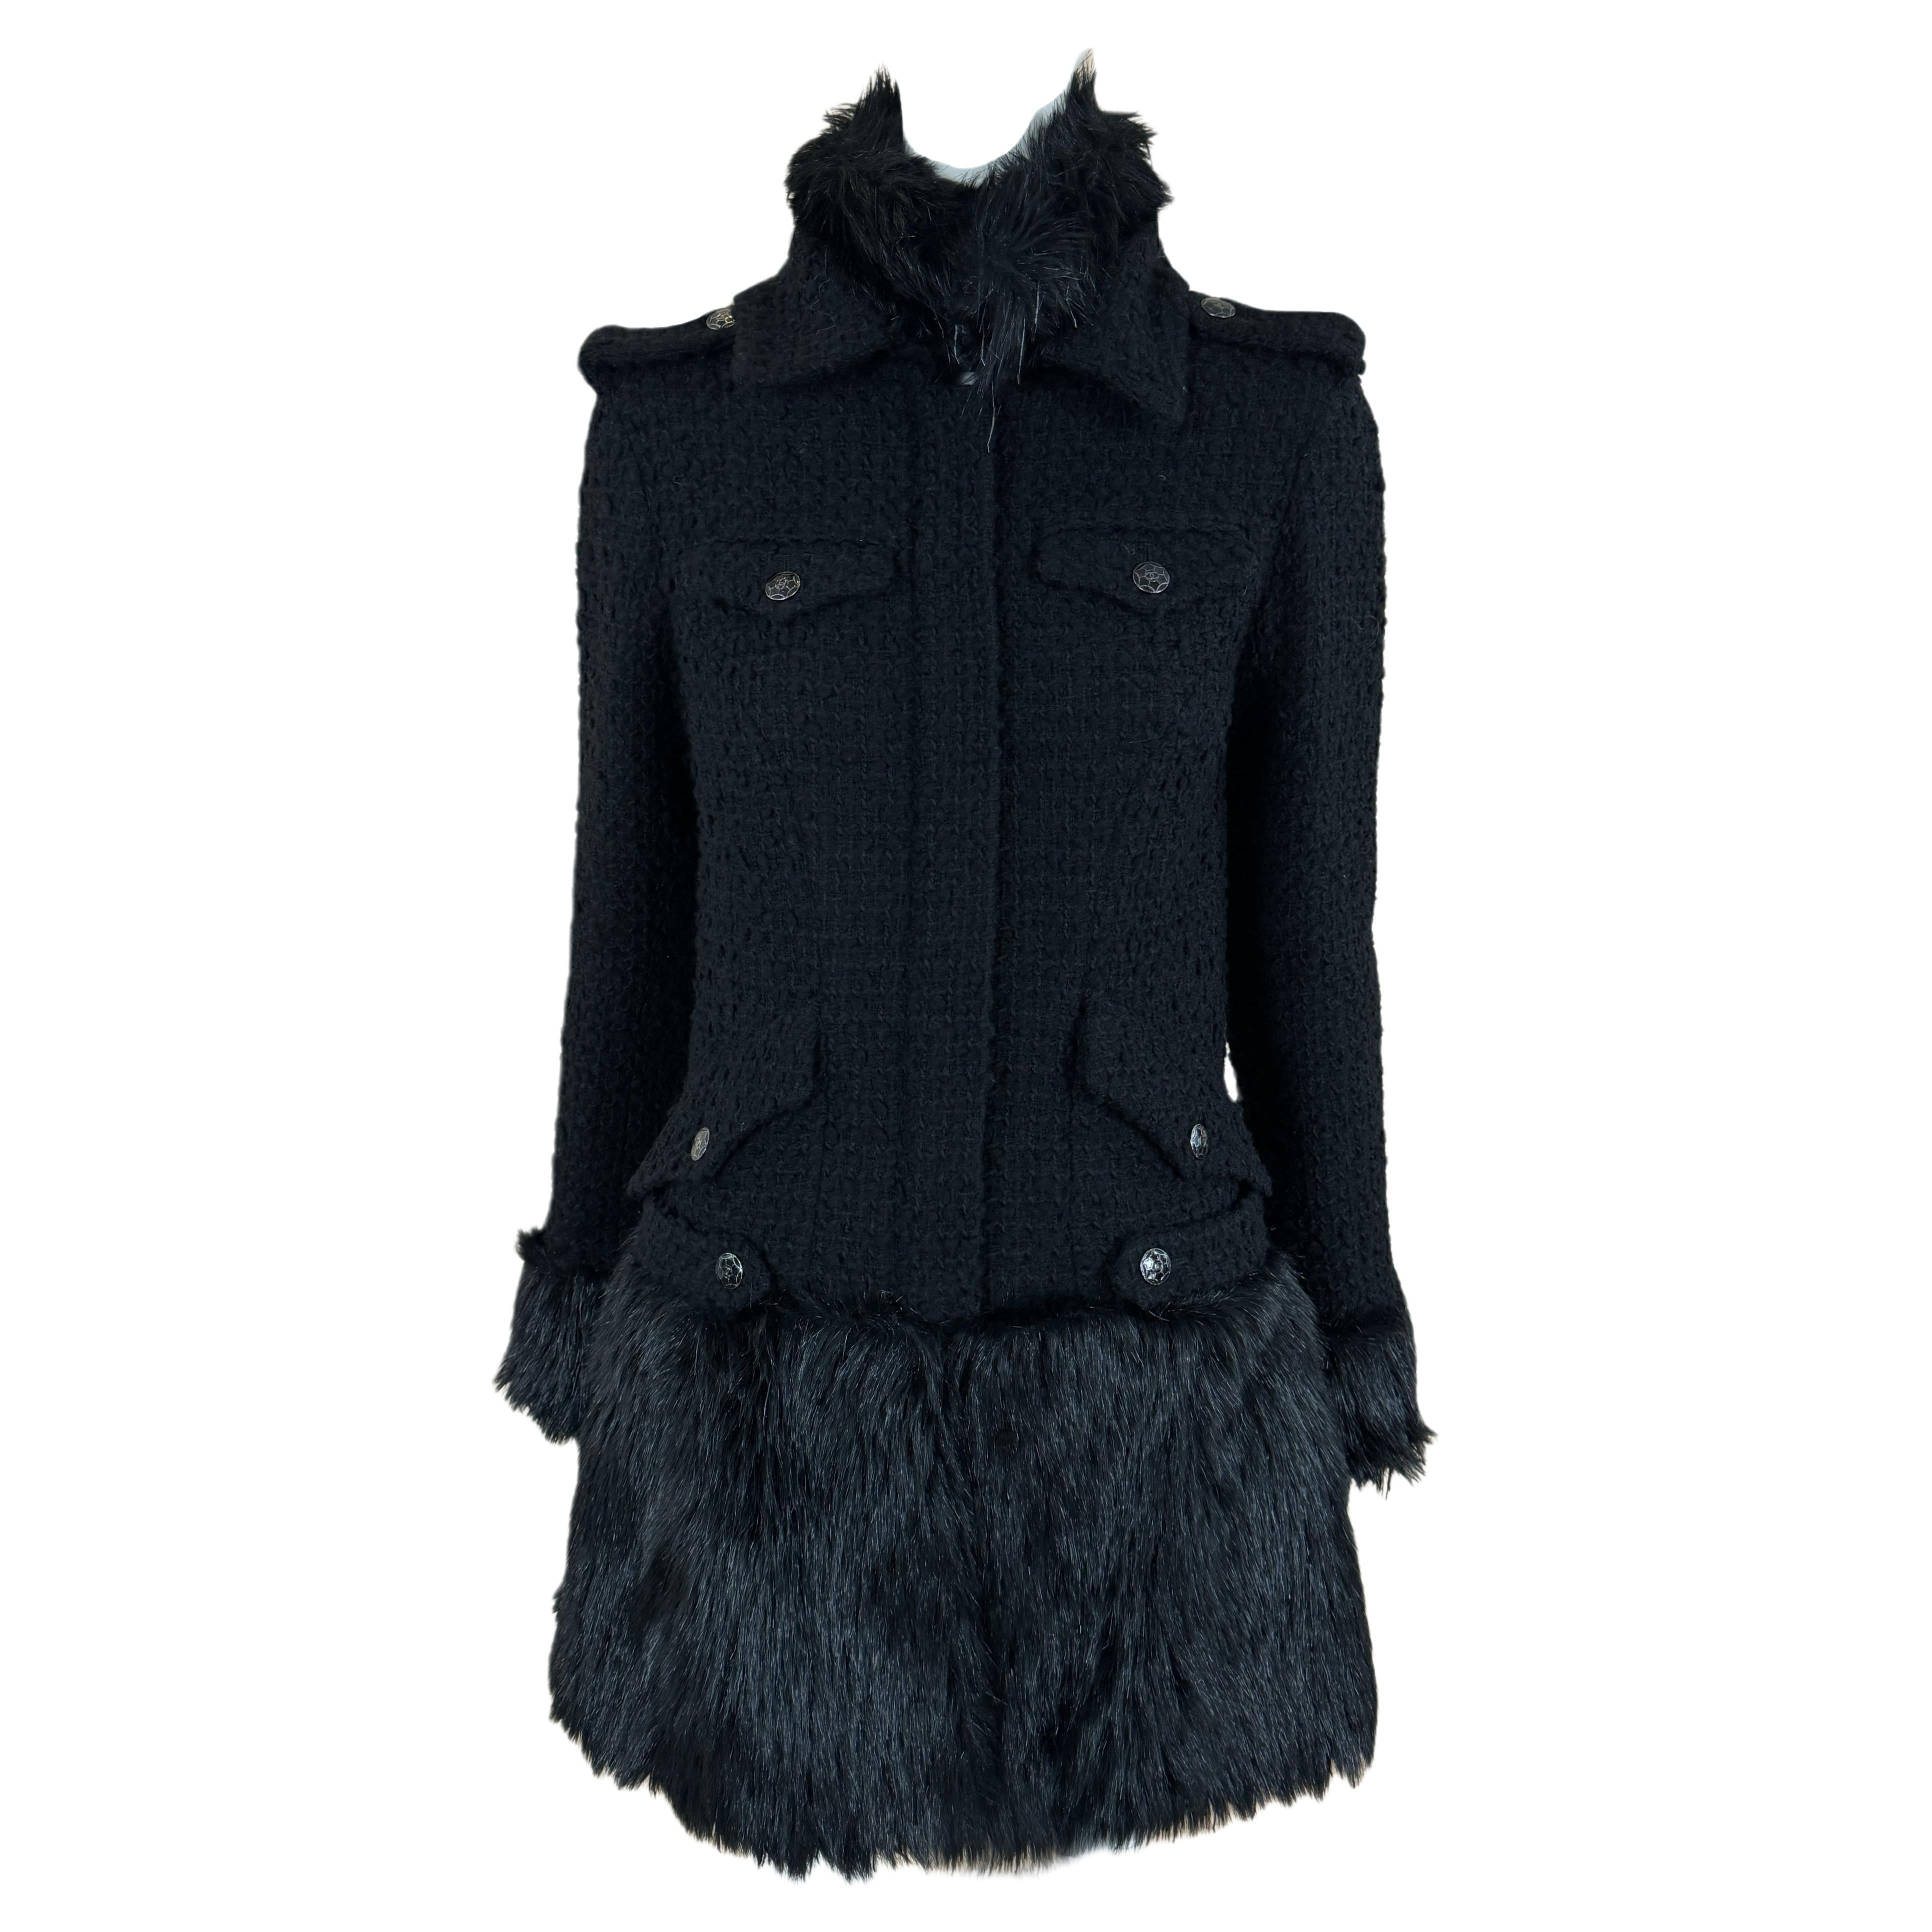 Chanel Jewel Embellishment Black Tweed Coat with Faux Fur Details For Sale